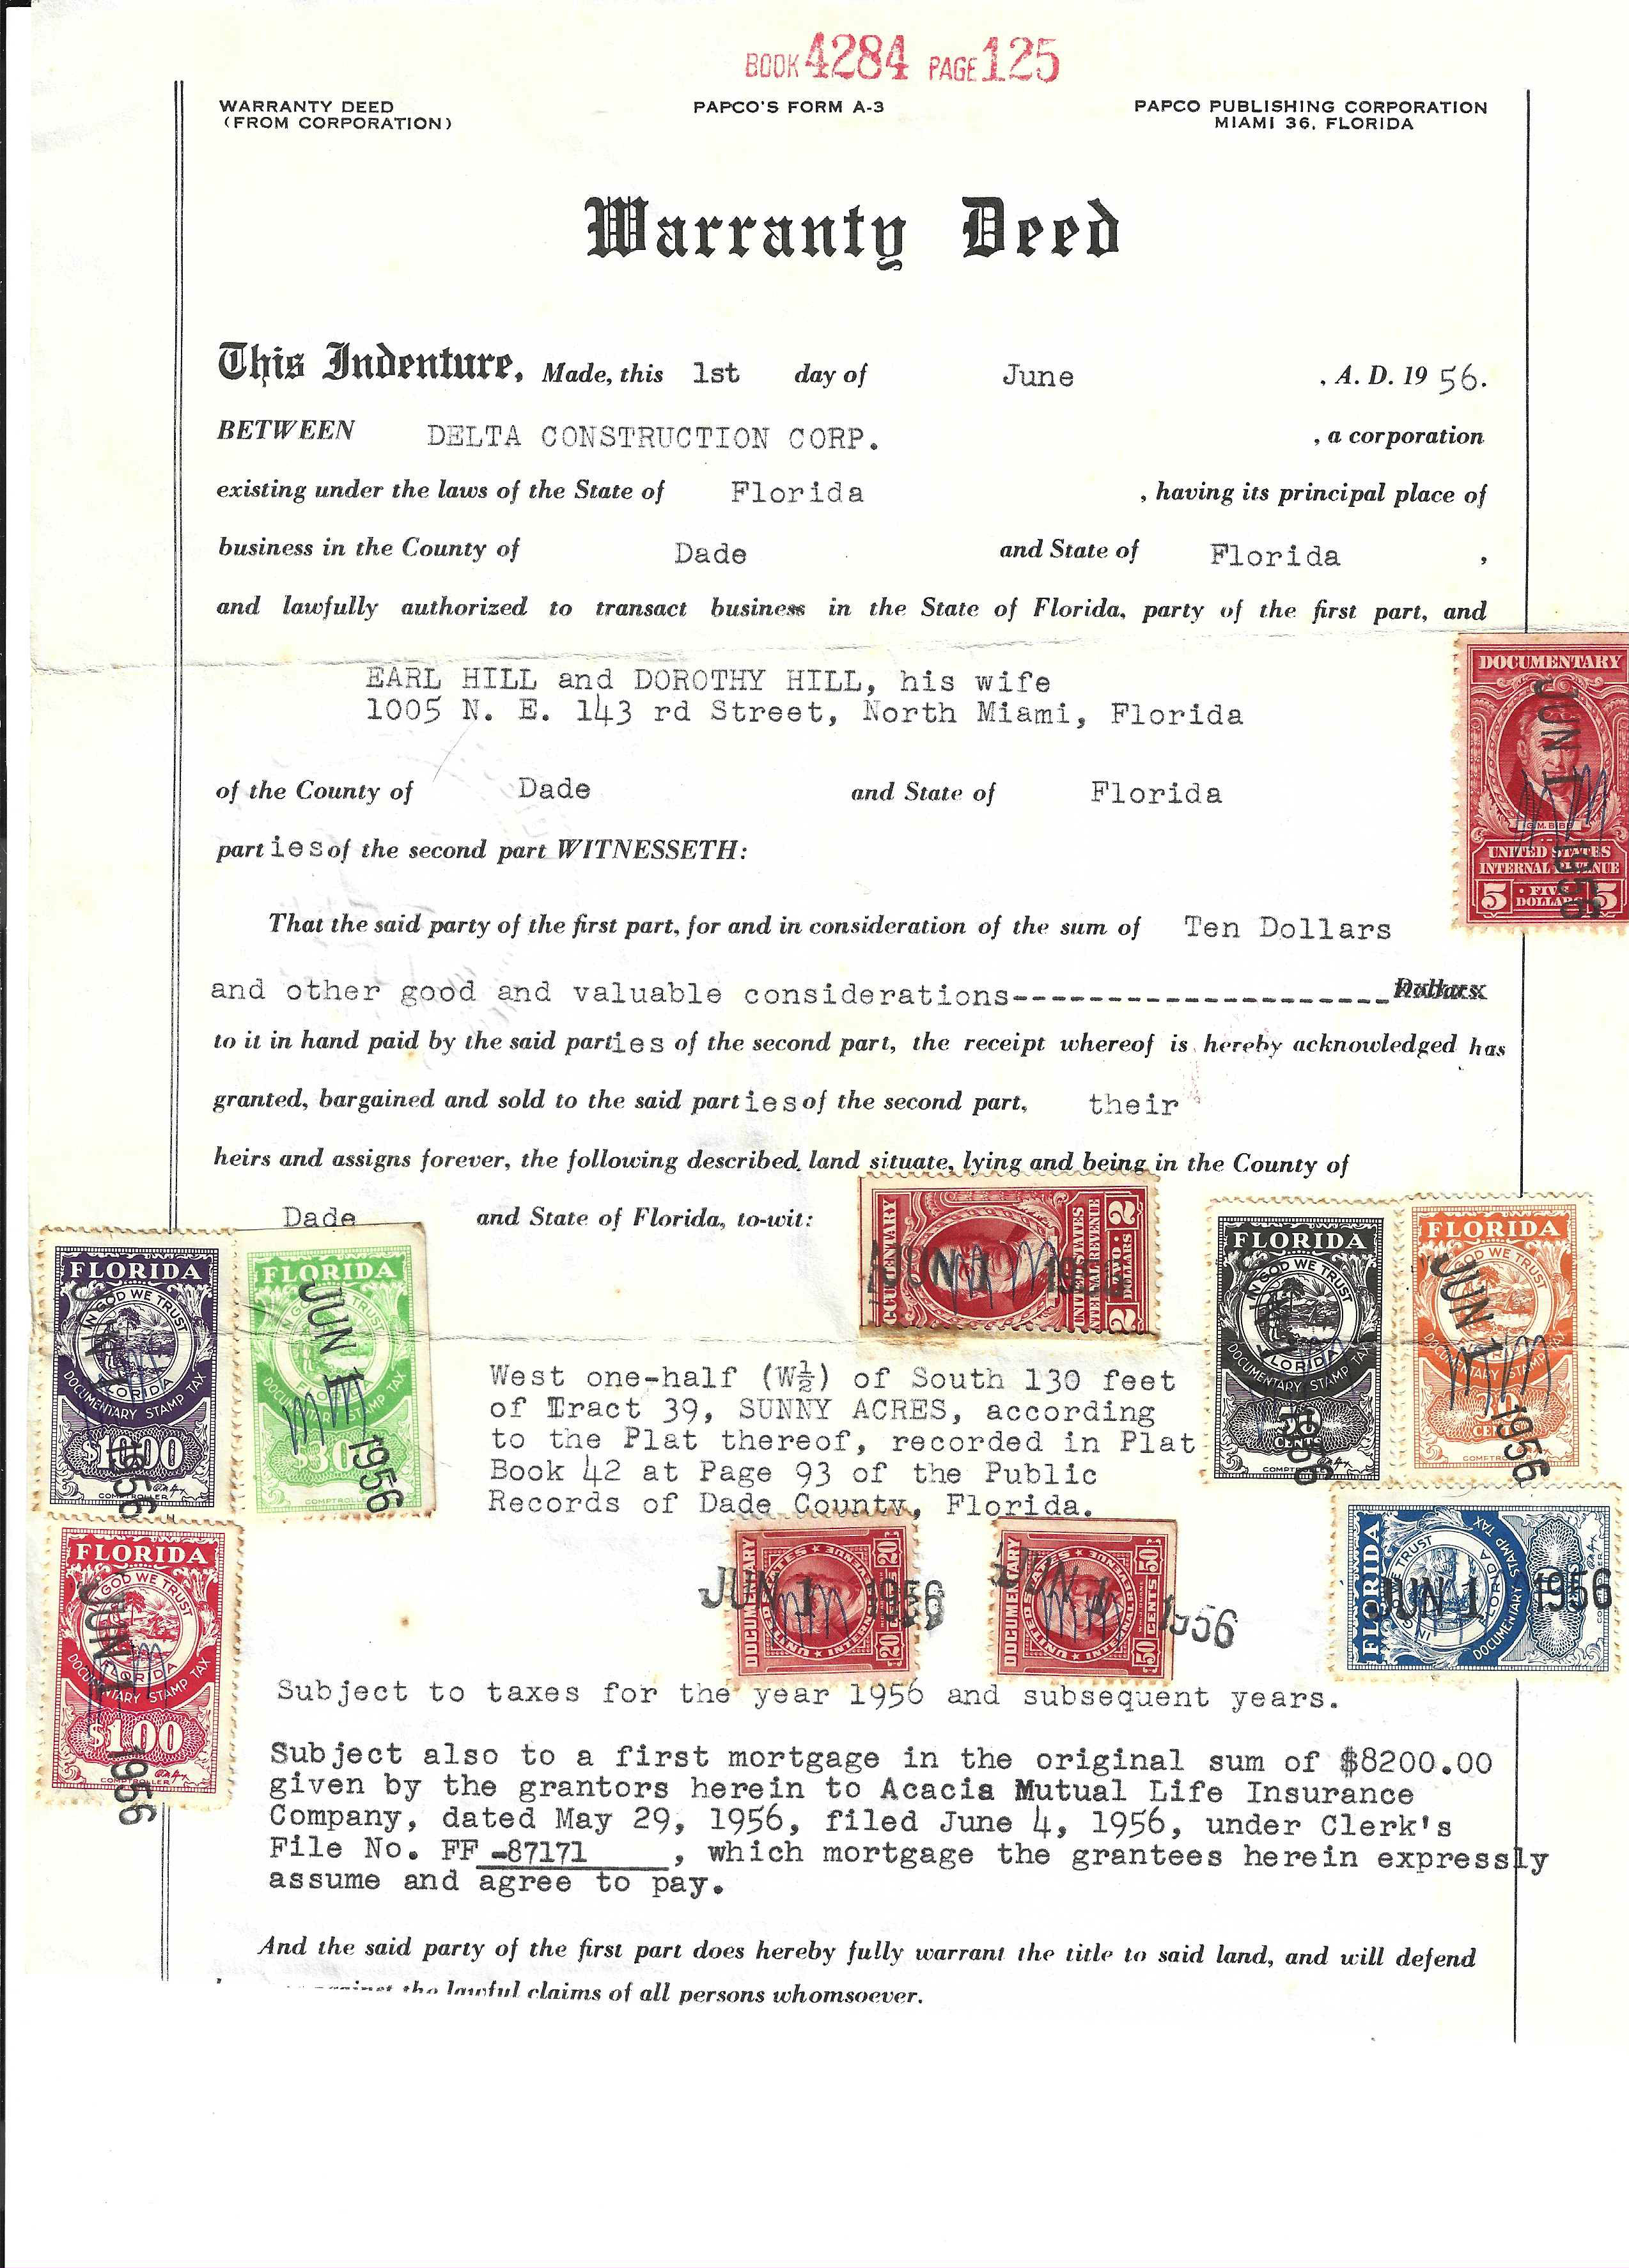 FL documentary Gay sig warranty deed w/ D25 10¢, D26 30¢, D27 50¢, D28 $1.00, D29 $3.00, D31 $10.00 plus 4 U.S.I.R. red deed tax stamps, Wrisley paid $60 for this doc